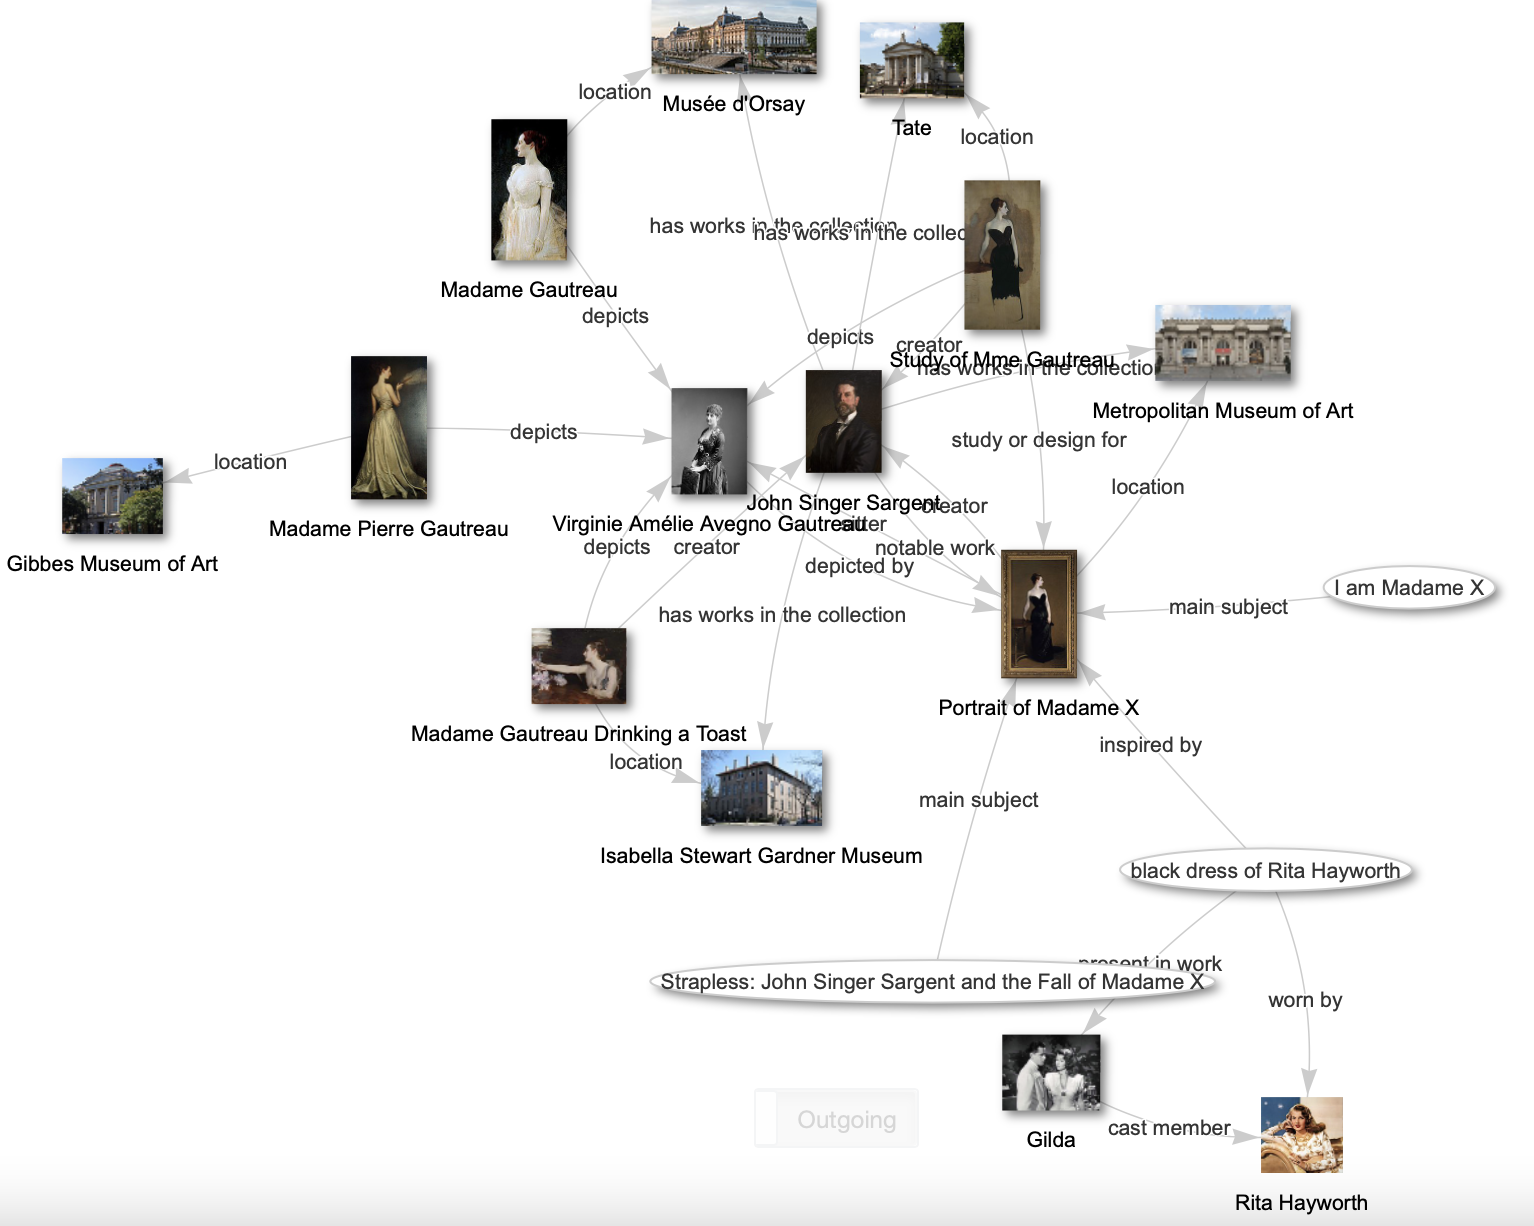 Wikidata SPARQL query graph showing relationships between paintings, art galleries, films, actors and fictional characters